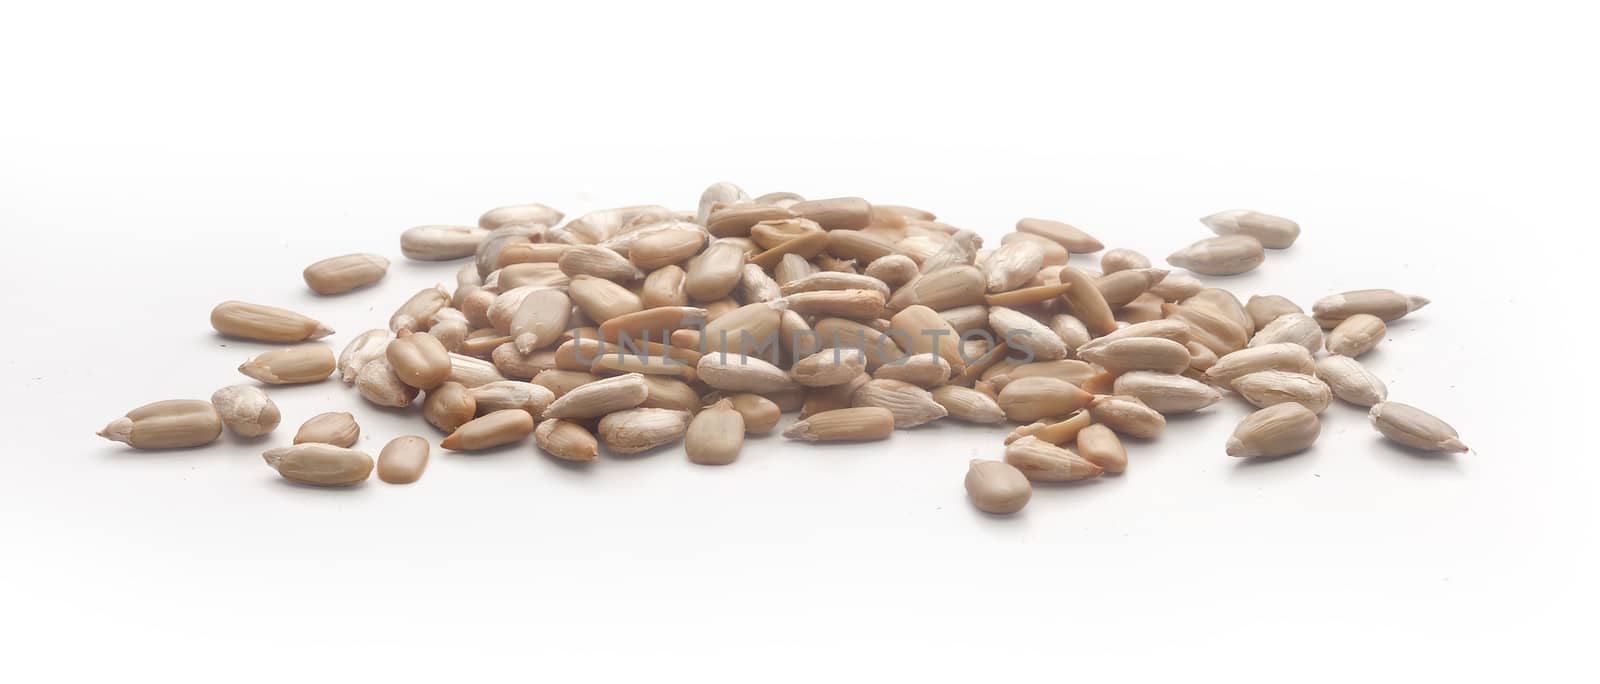 Isolated handful of sunflower's seeds without shell on the white background